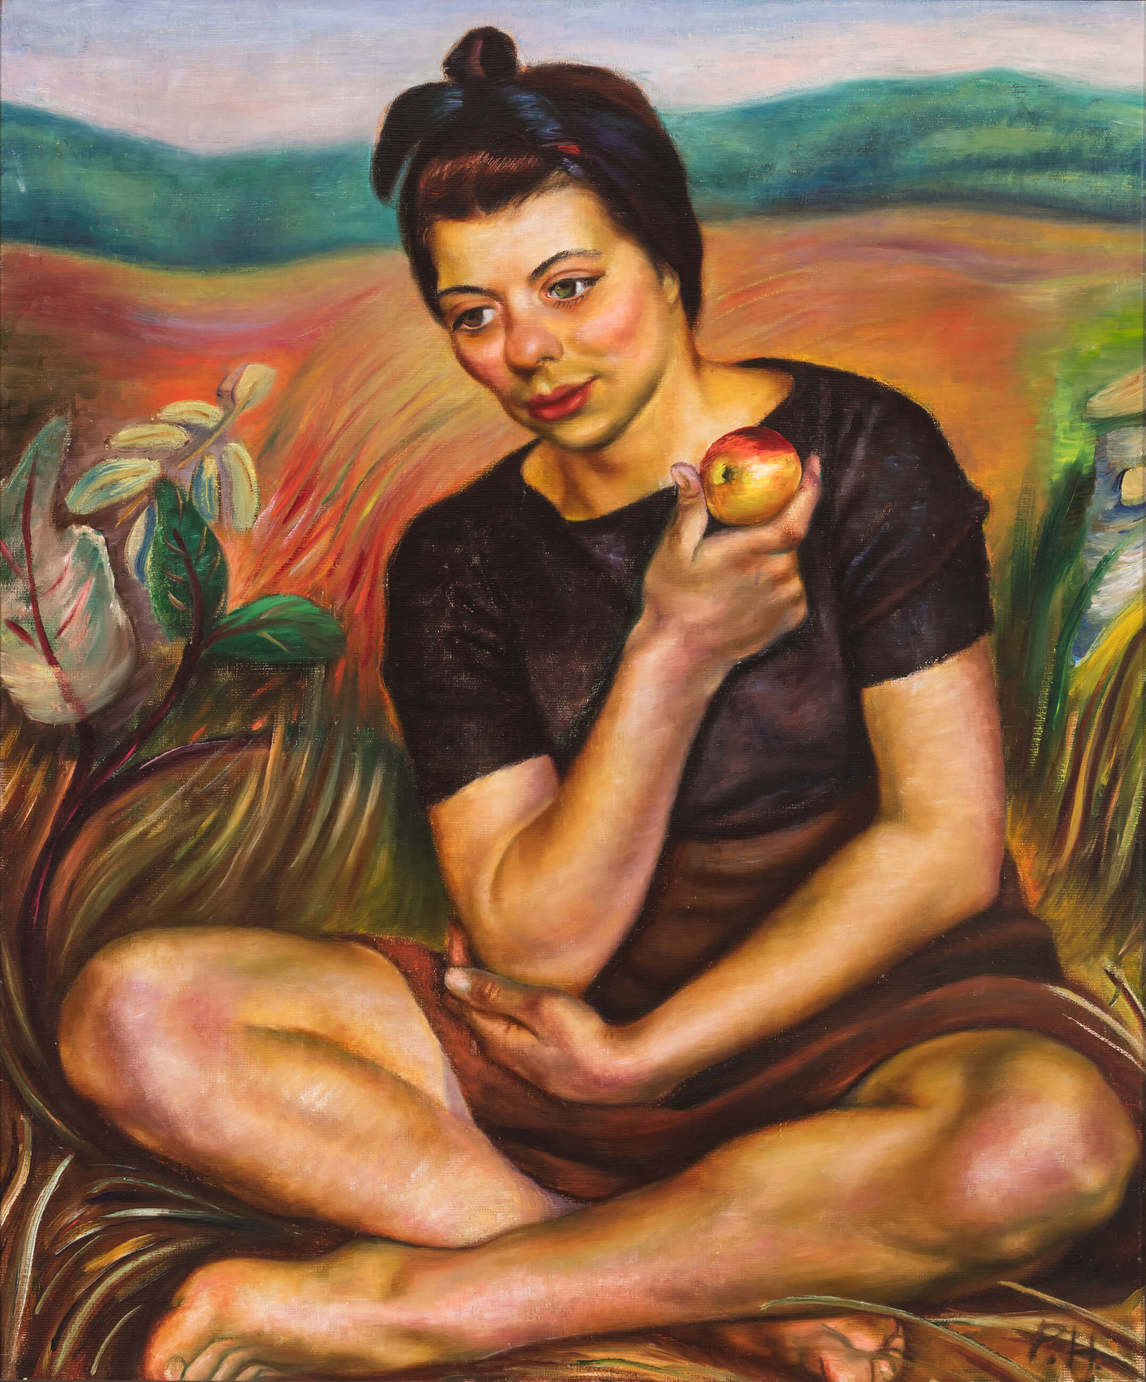 Art Canada Institute, Prudence Heward, Autumn (Girl with an Apple), 1942